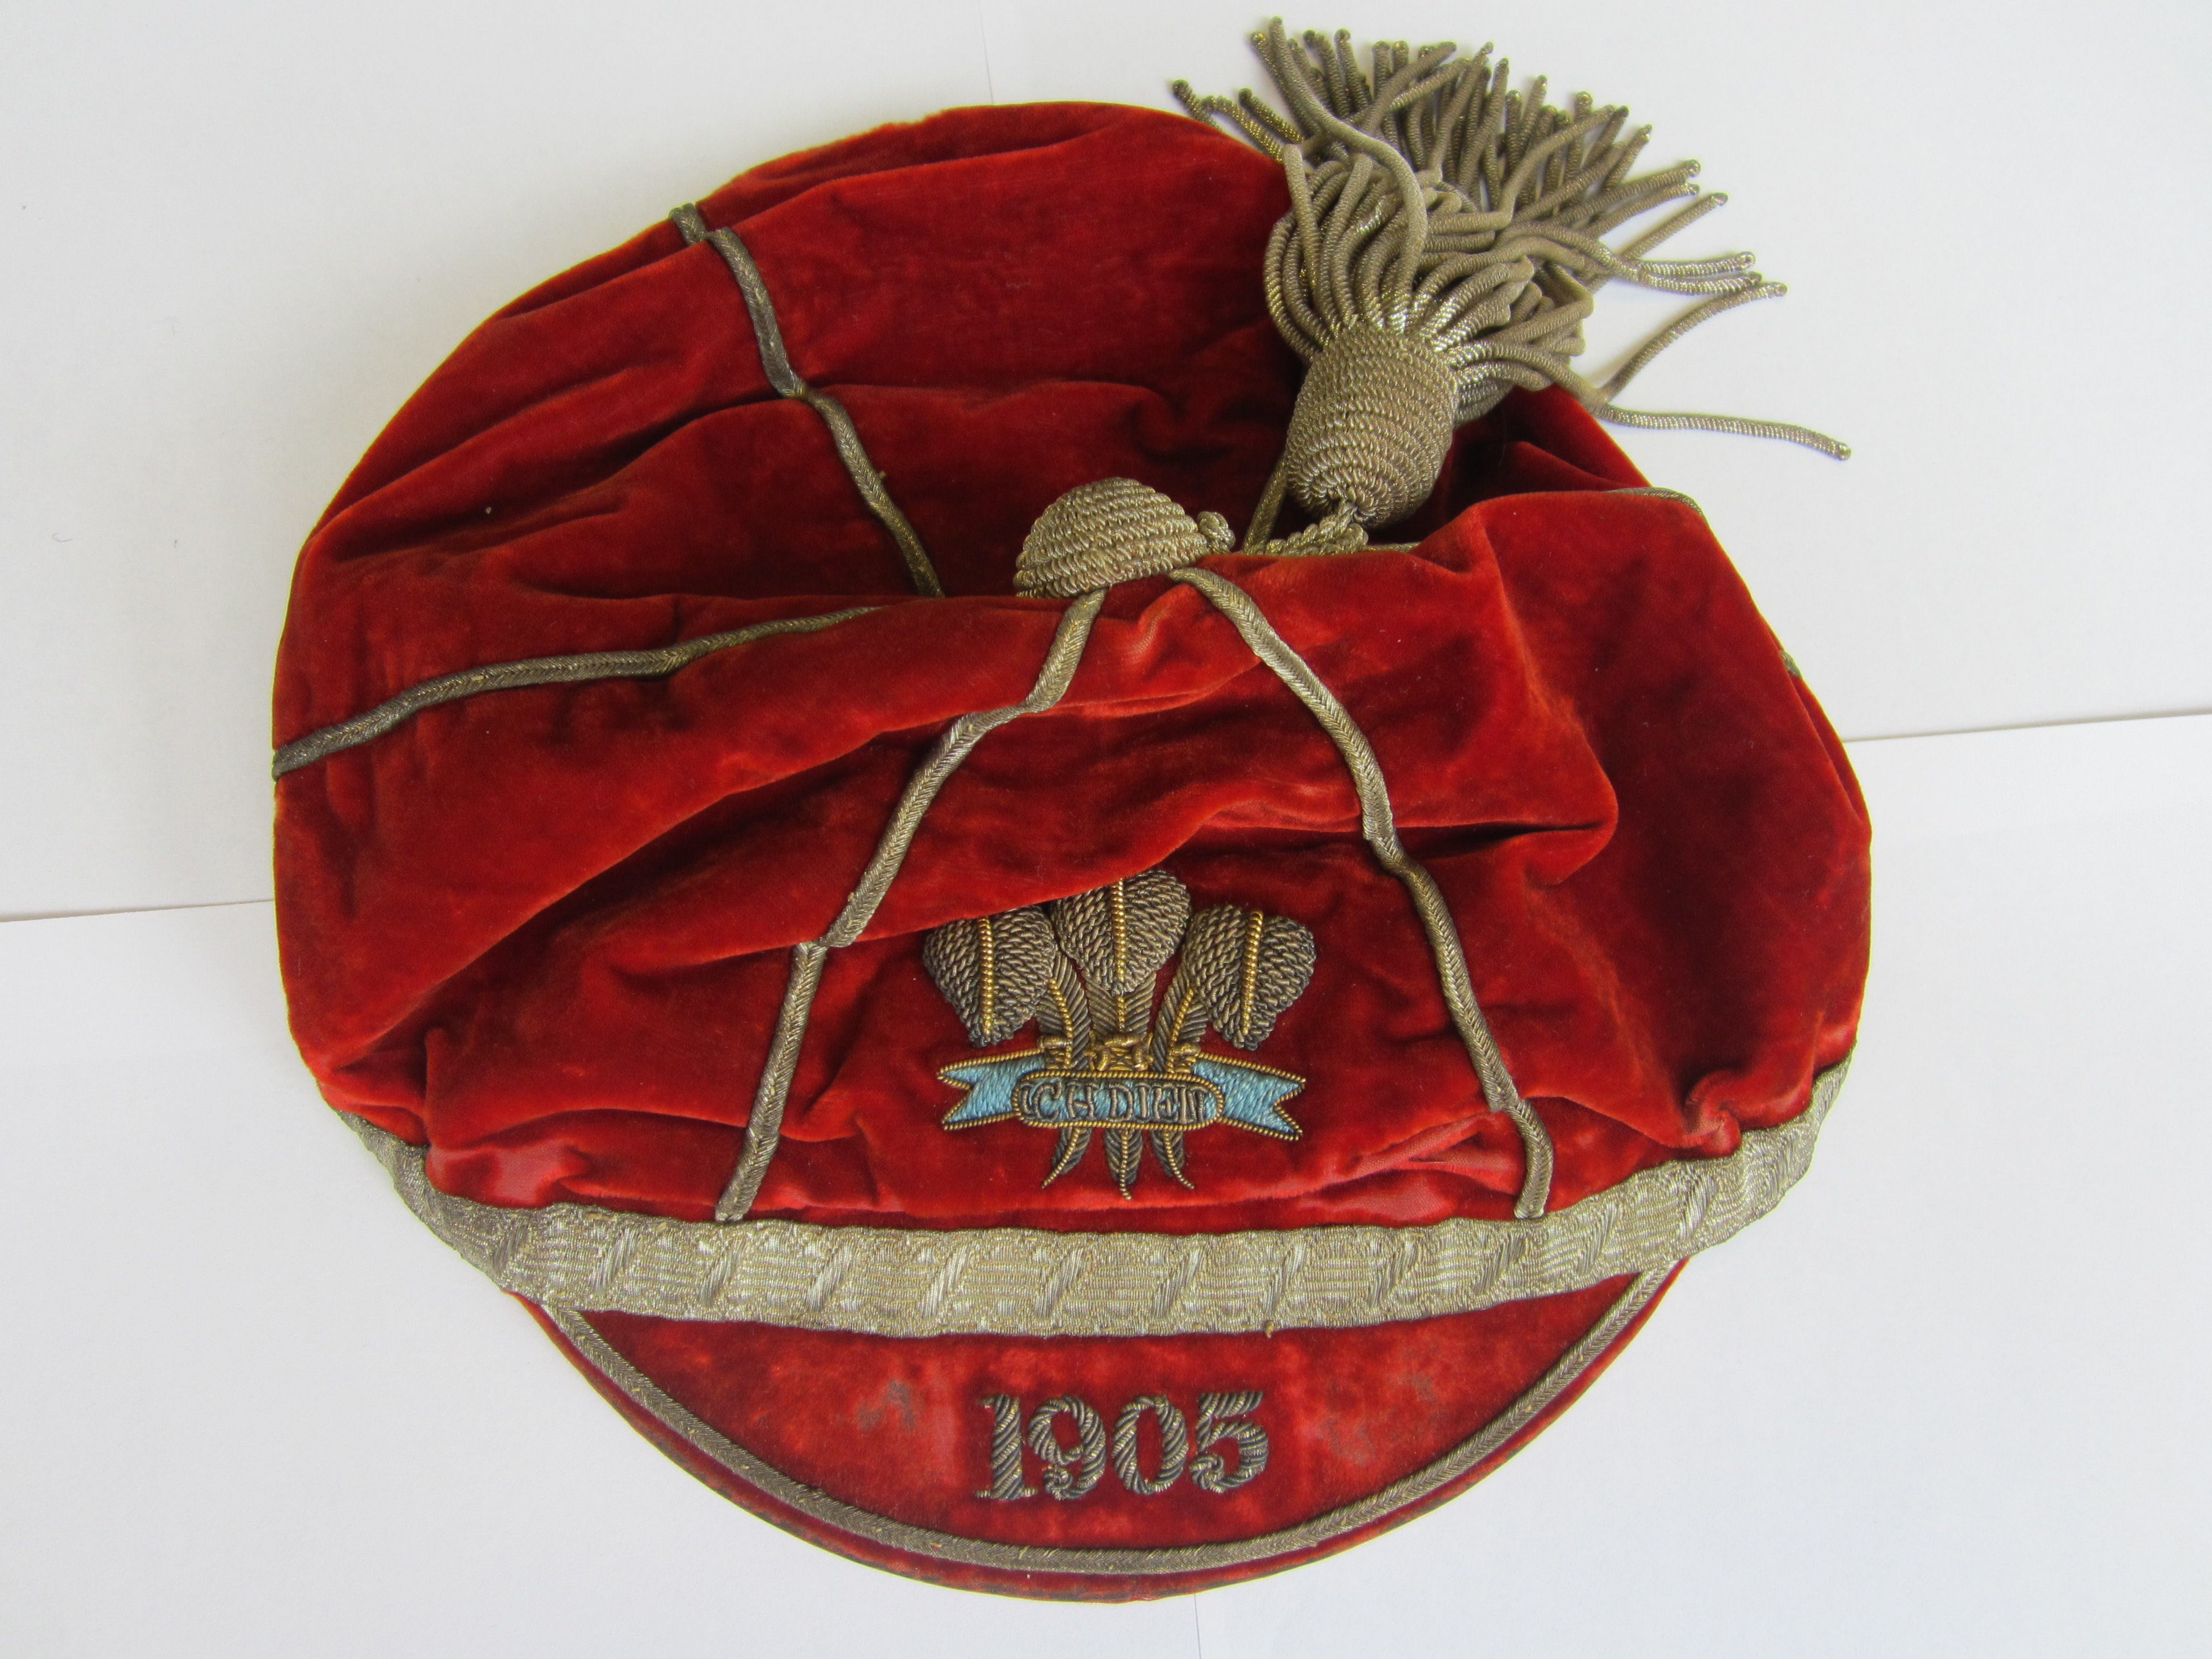 Percy Bush Wales Rugby cap 1905 - Sold £2000